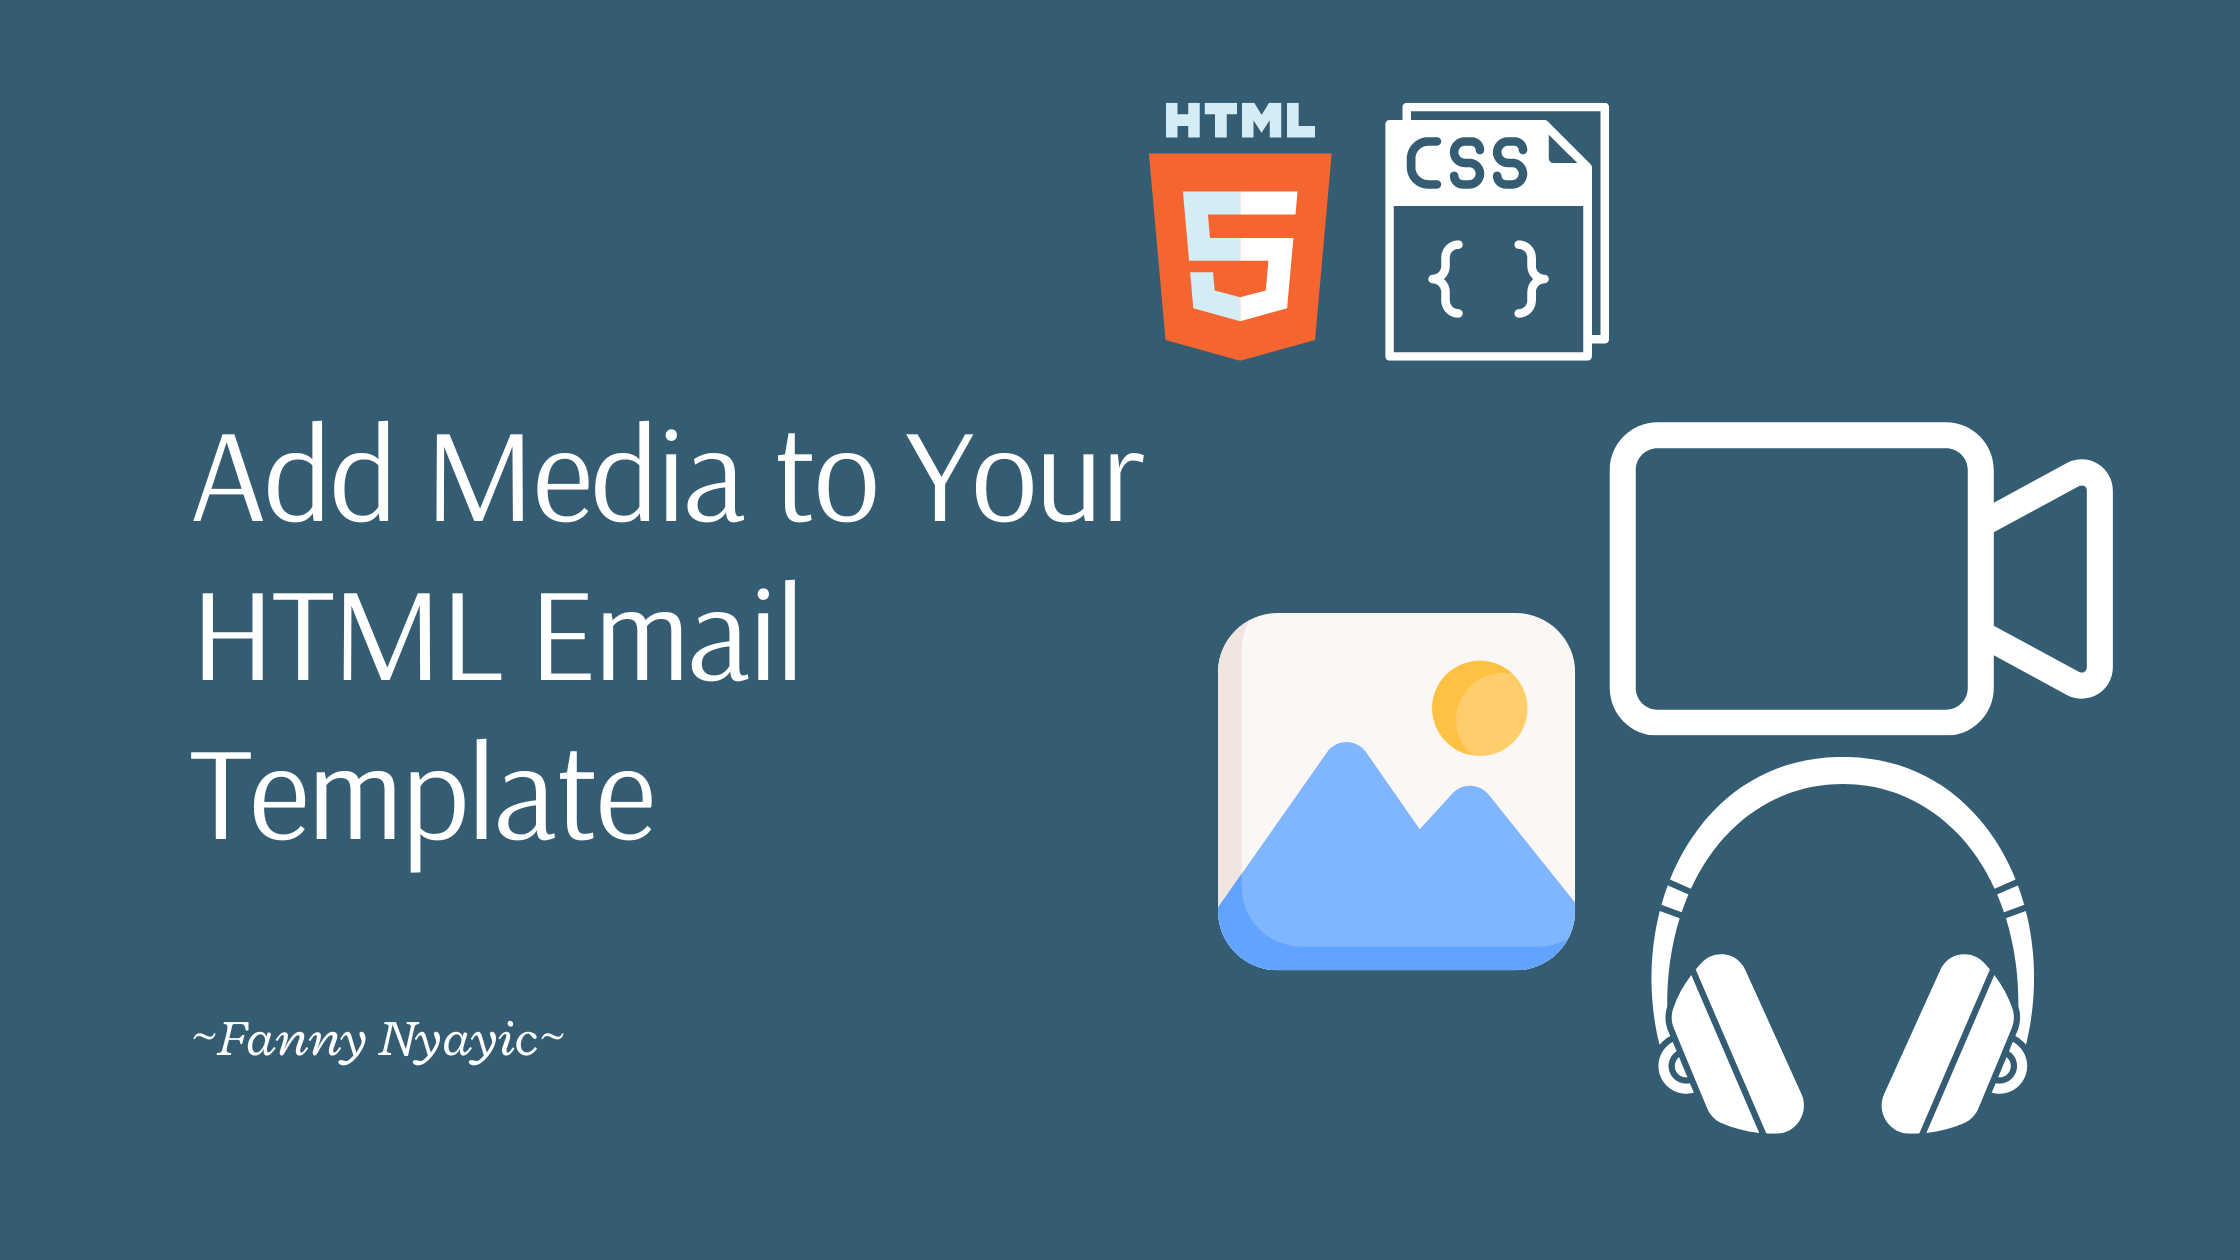 How to Add Media to Your HTML Email Template